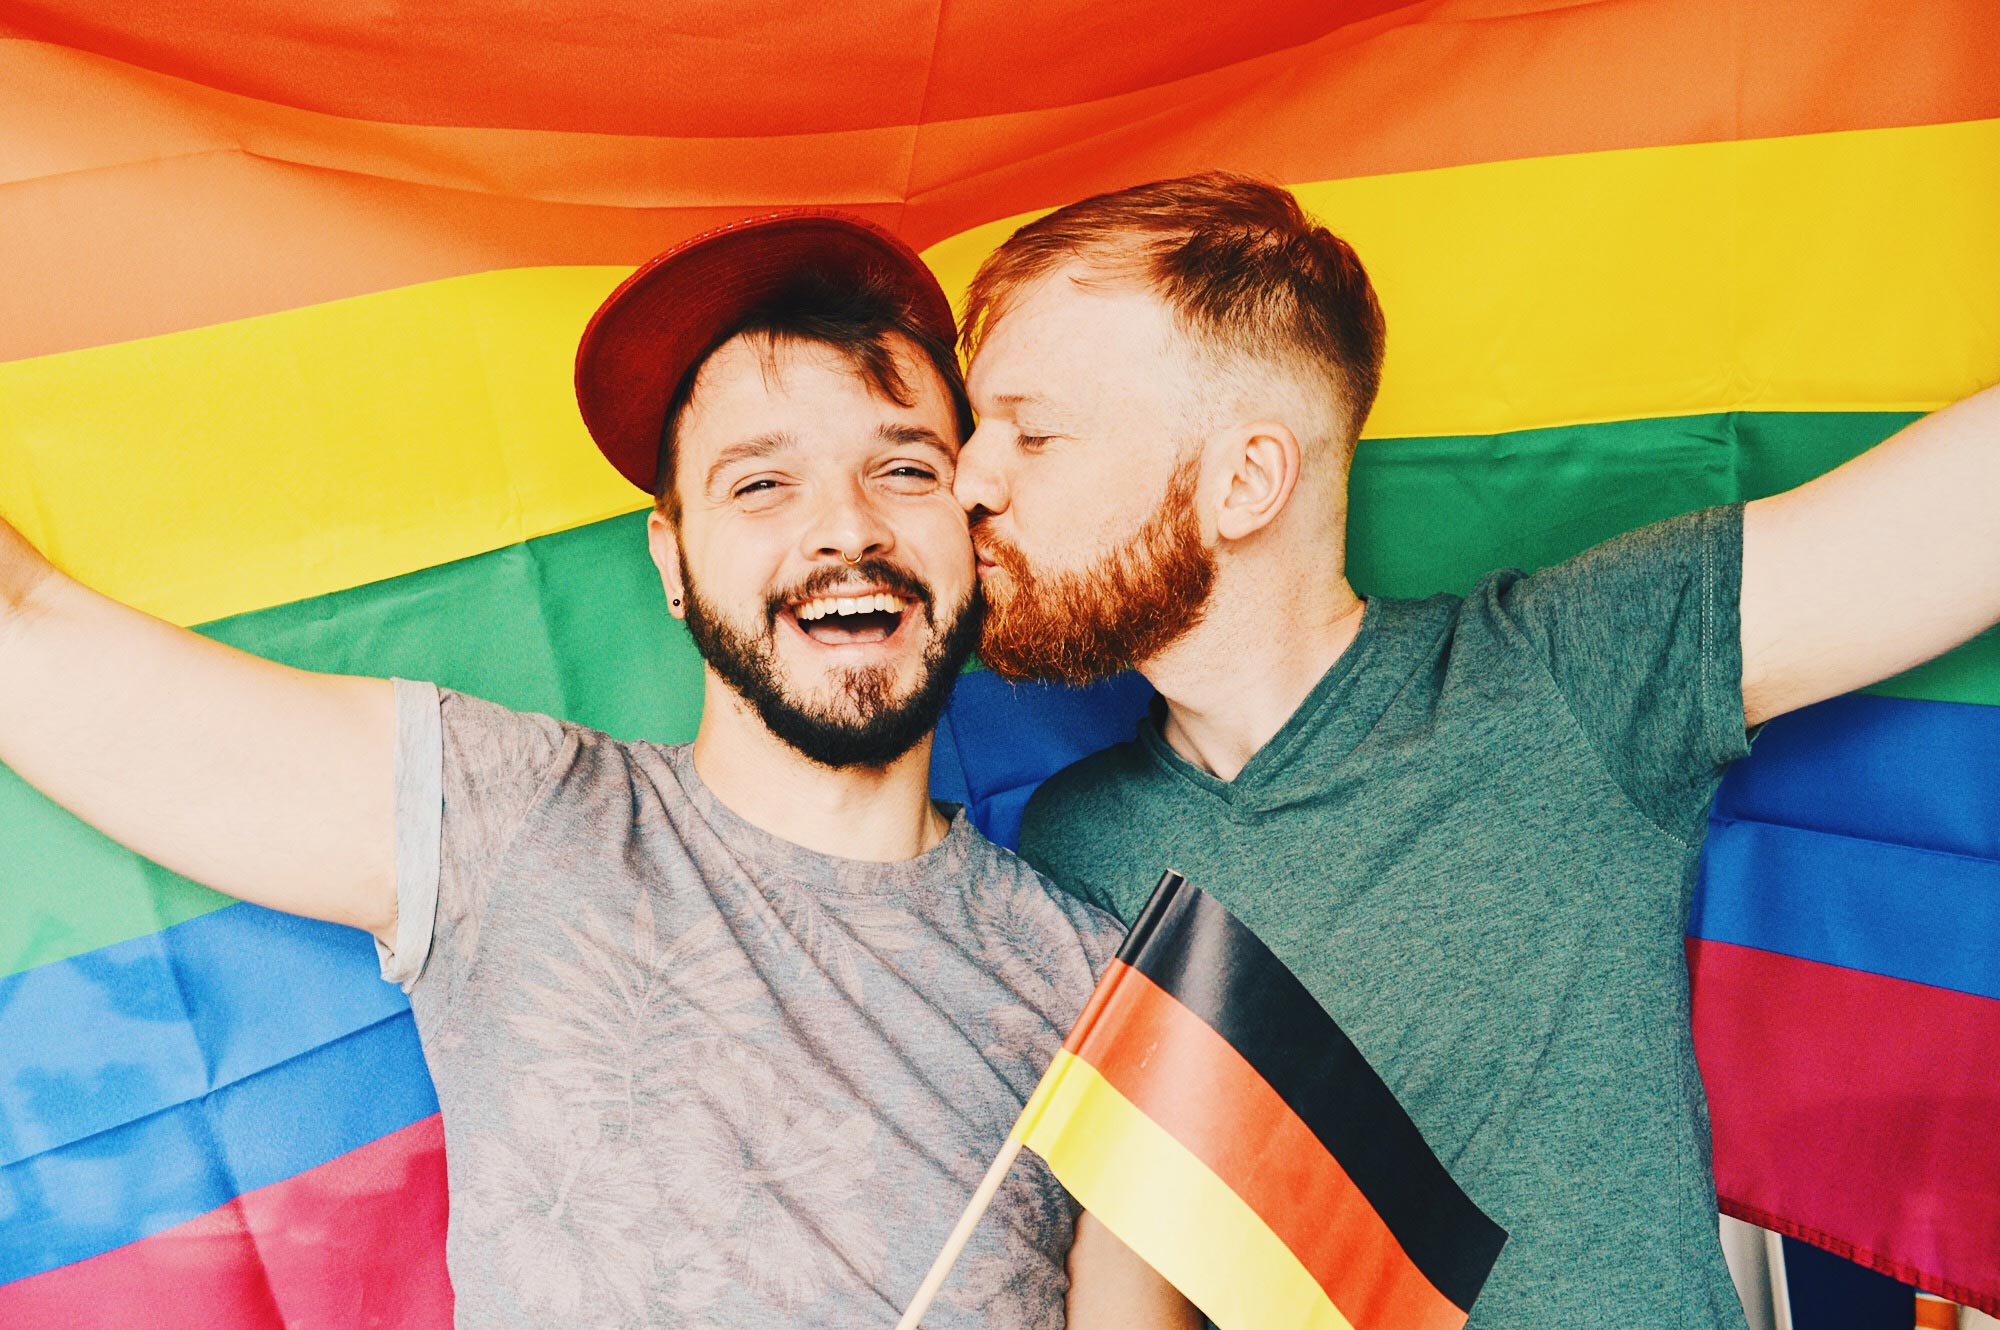 It’s finally here: Same-Sex Marriage Equality in Germany!